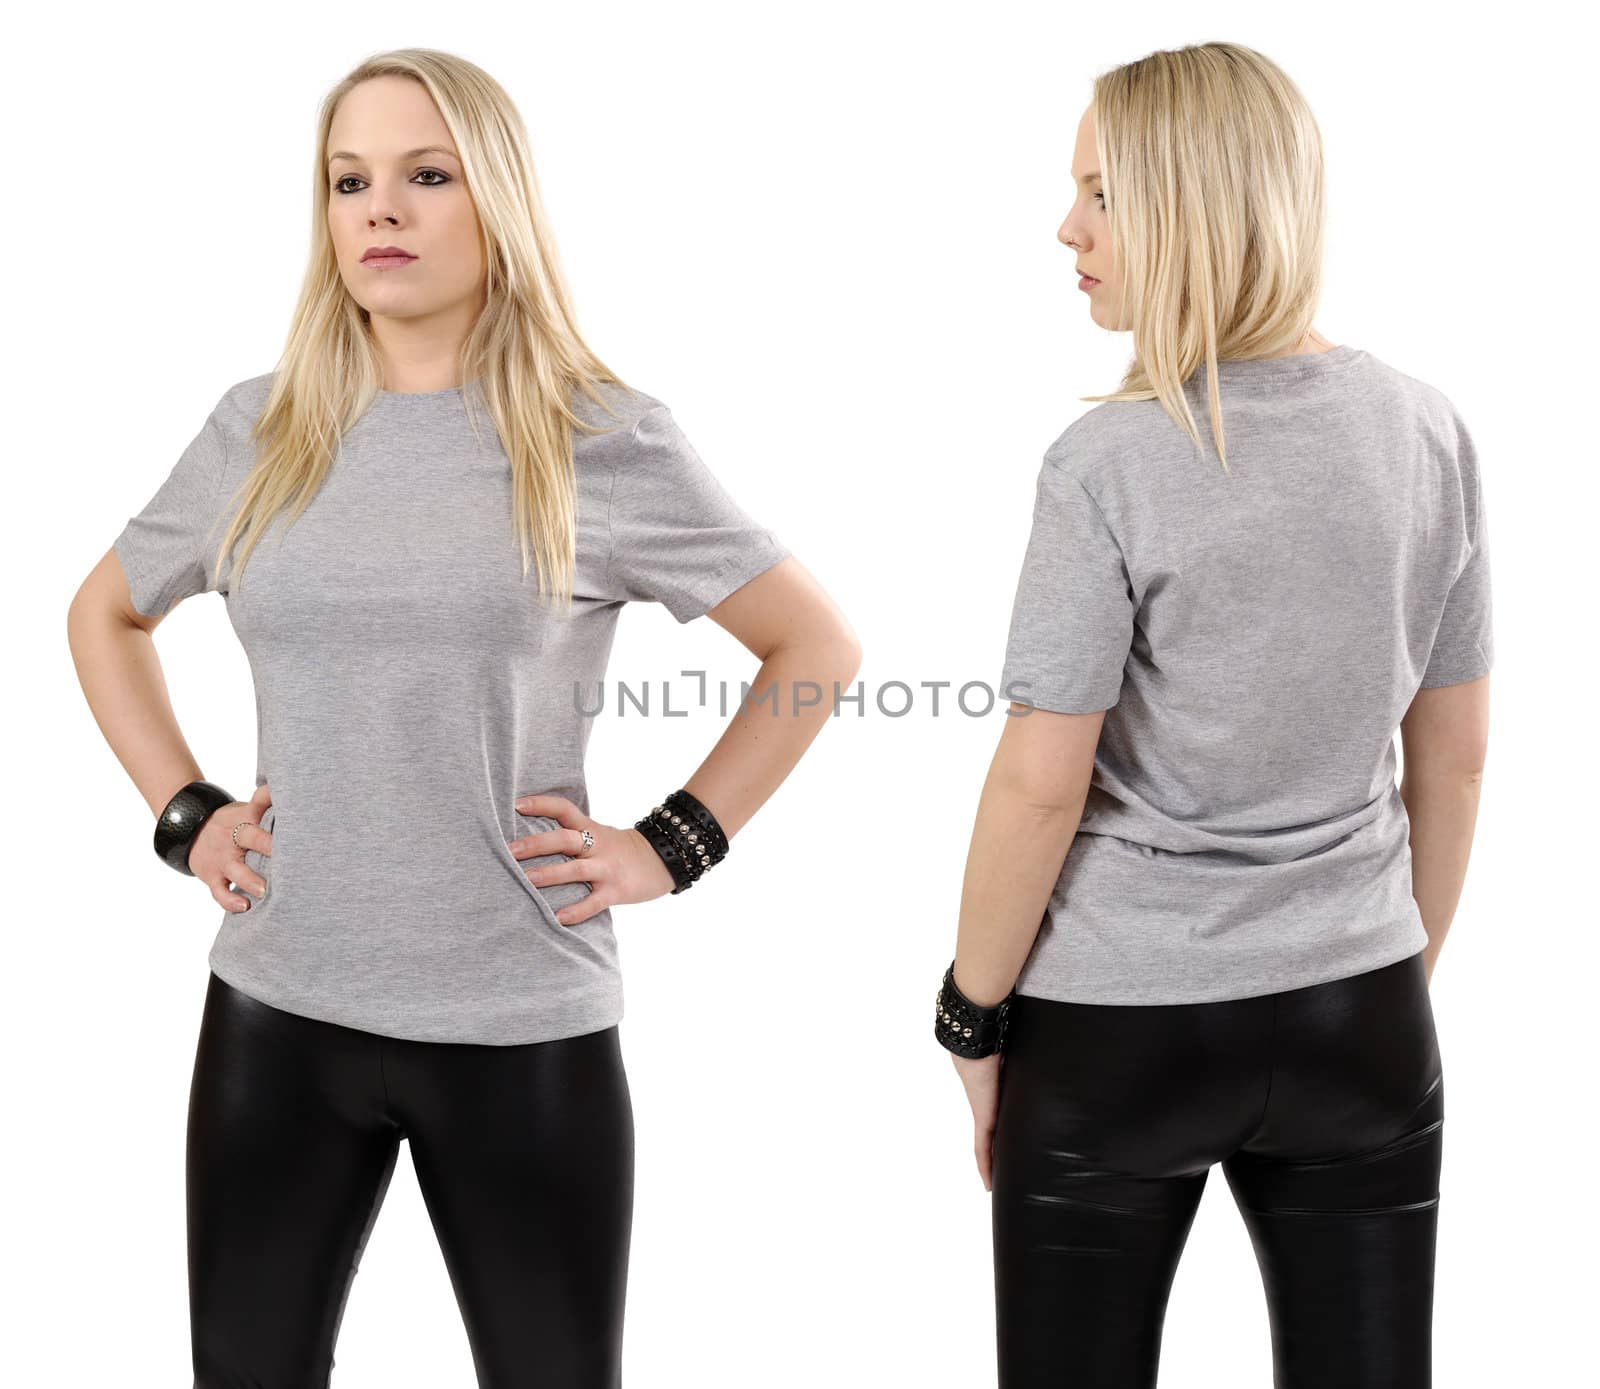 Young beautiful blond female posing with a blank gray t-shirt, front and back view. Ready for your design or artwork.